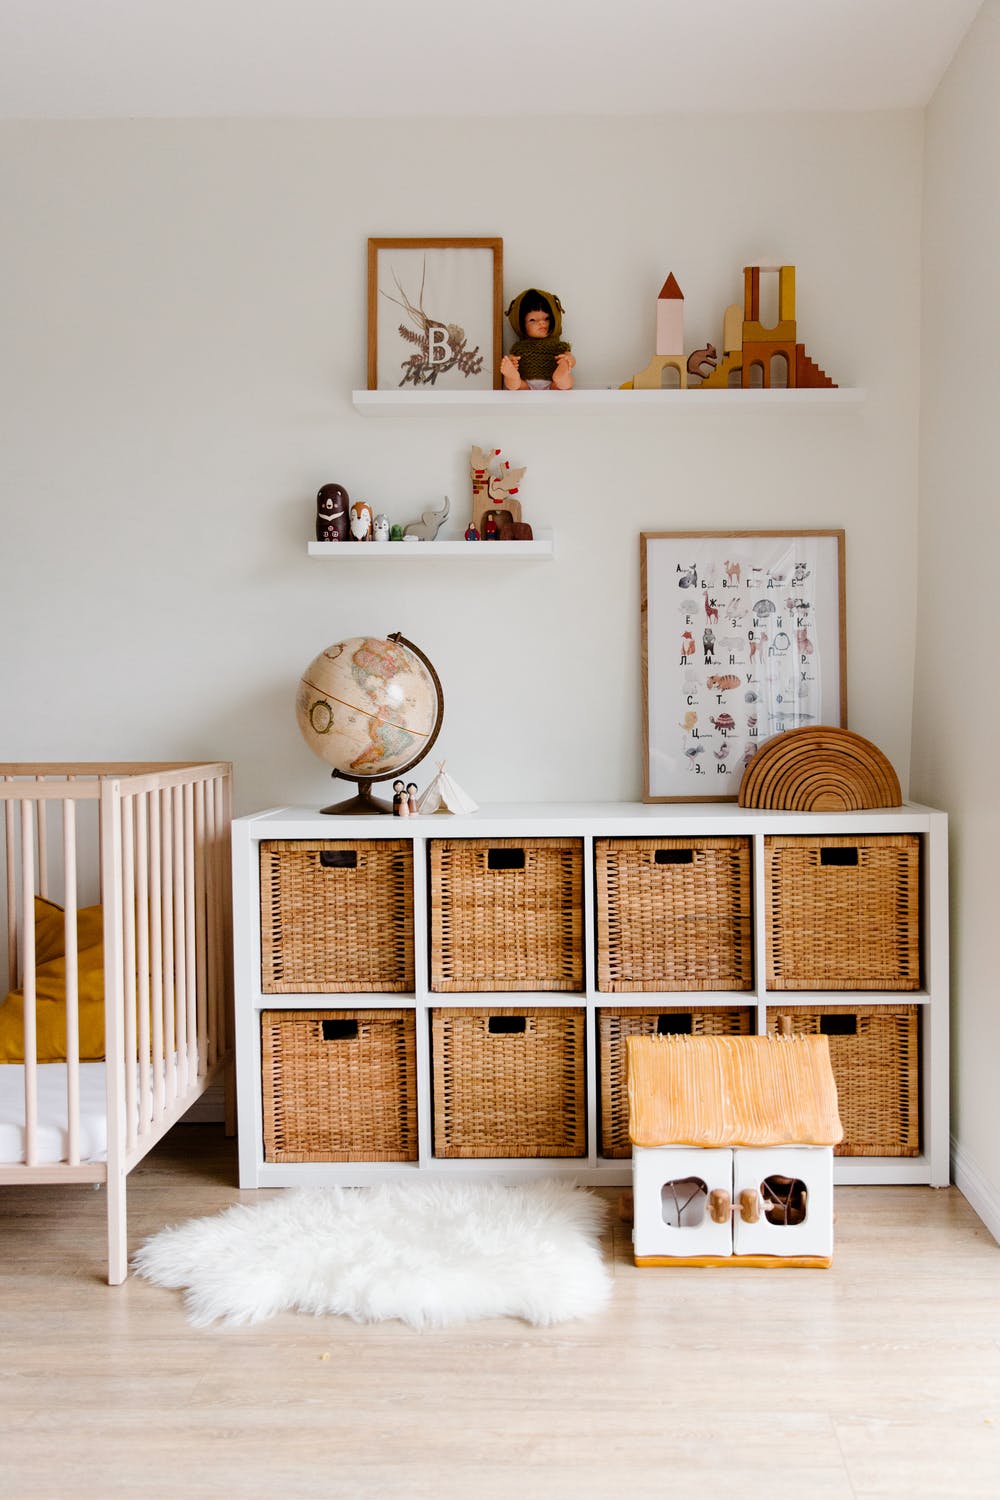 Crib and wooden furniture placed in children's bedroom.